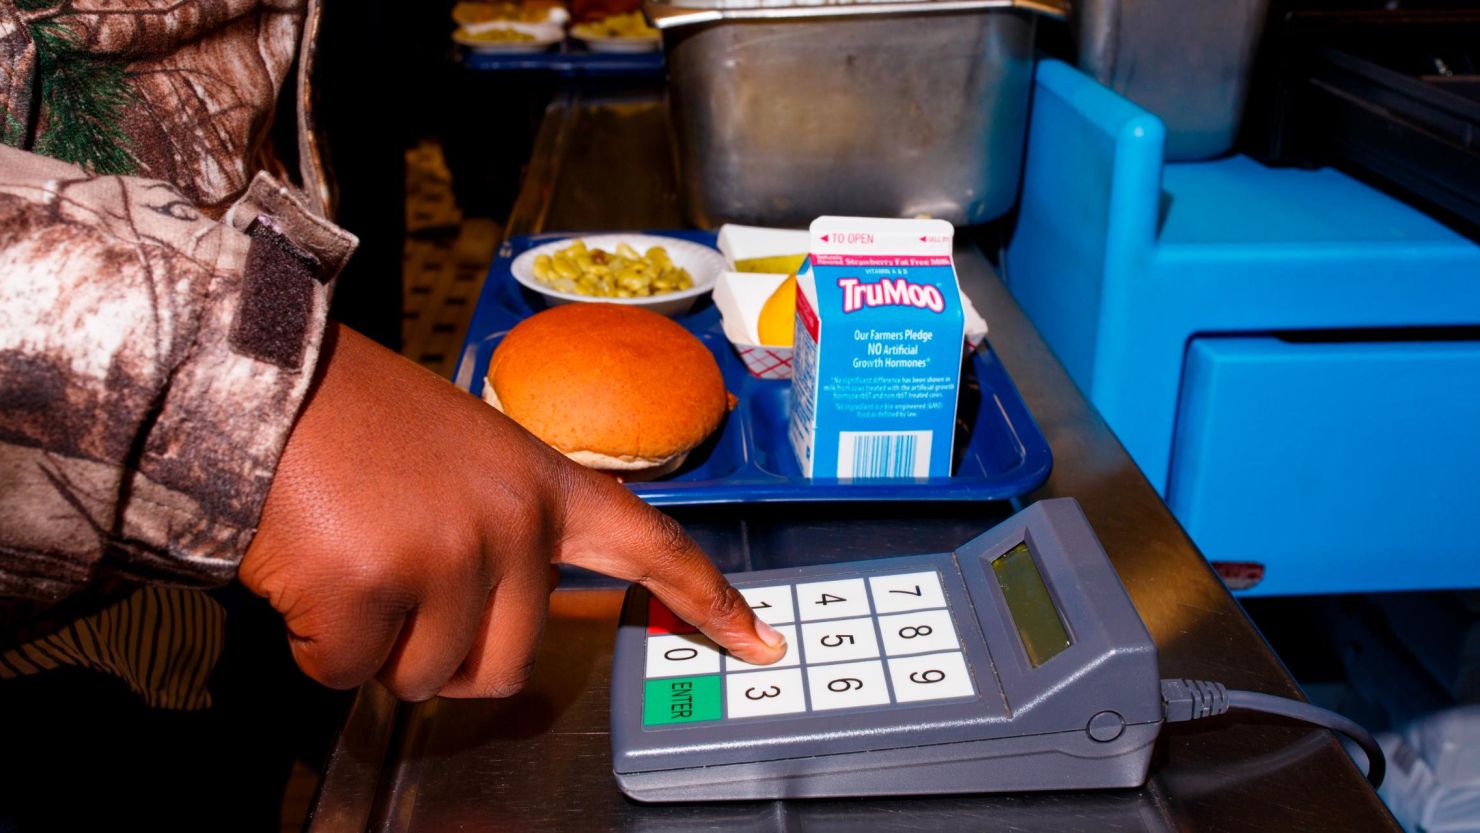 Here's your school district's lunch debt policy